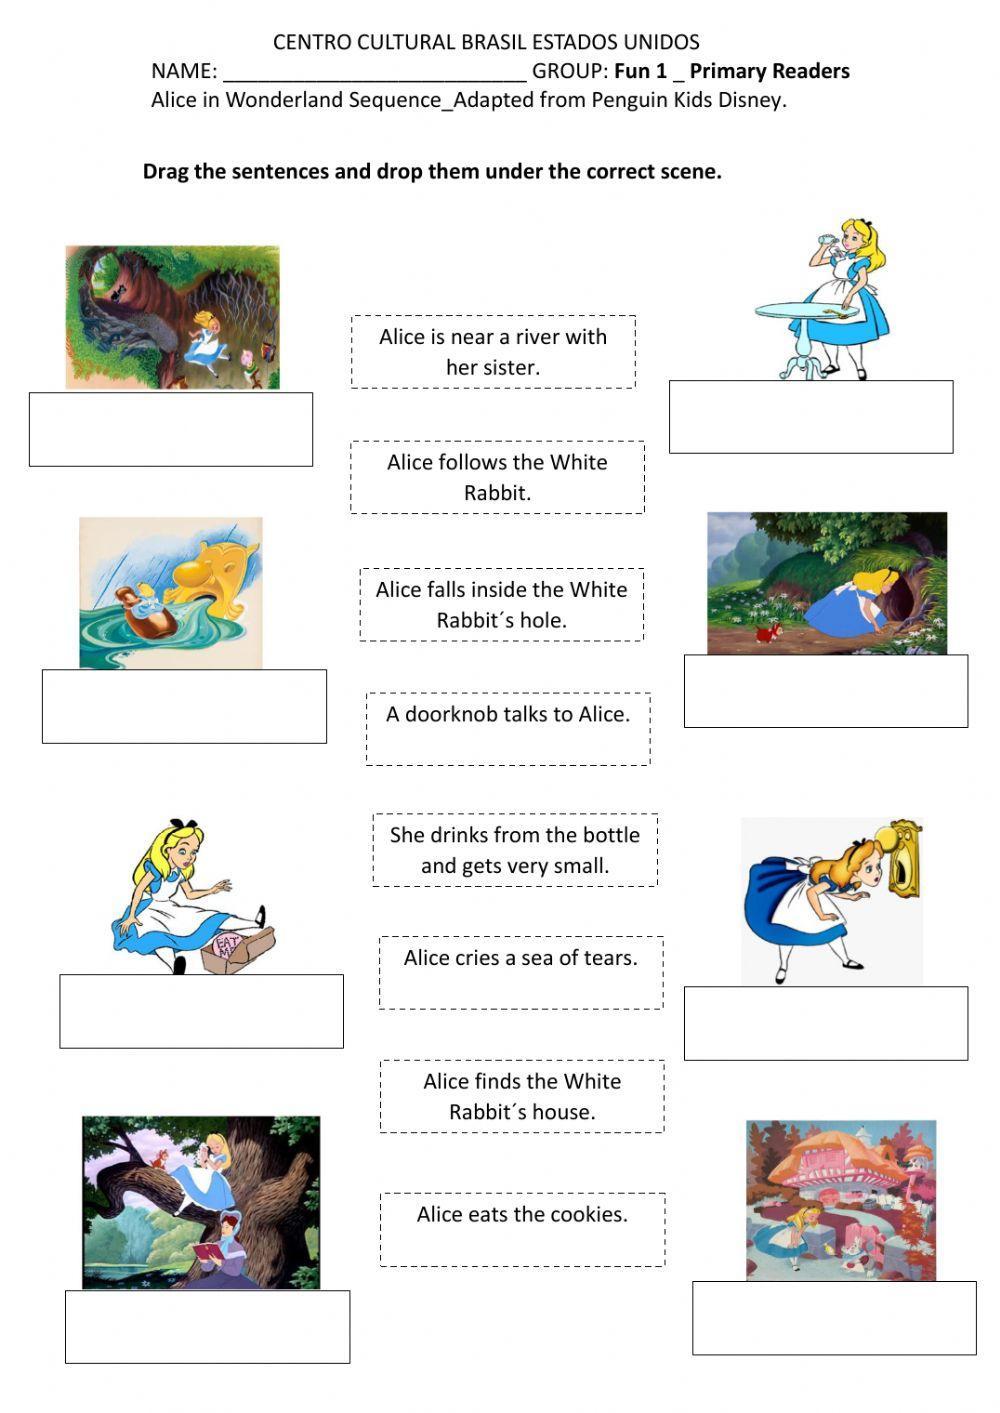 Alice in Wonderland Story Sequence